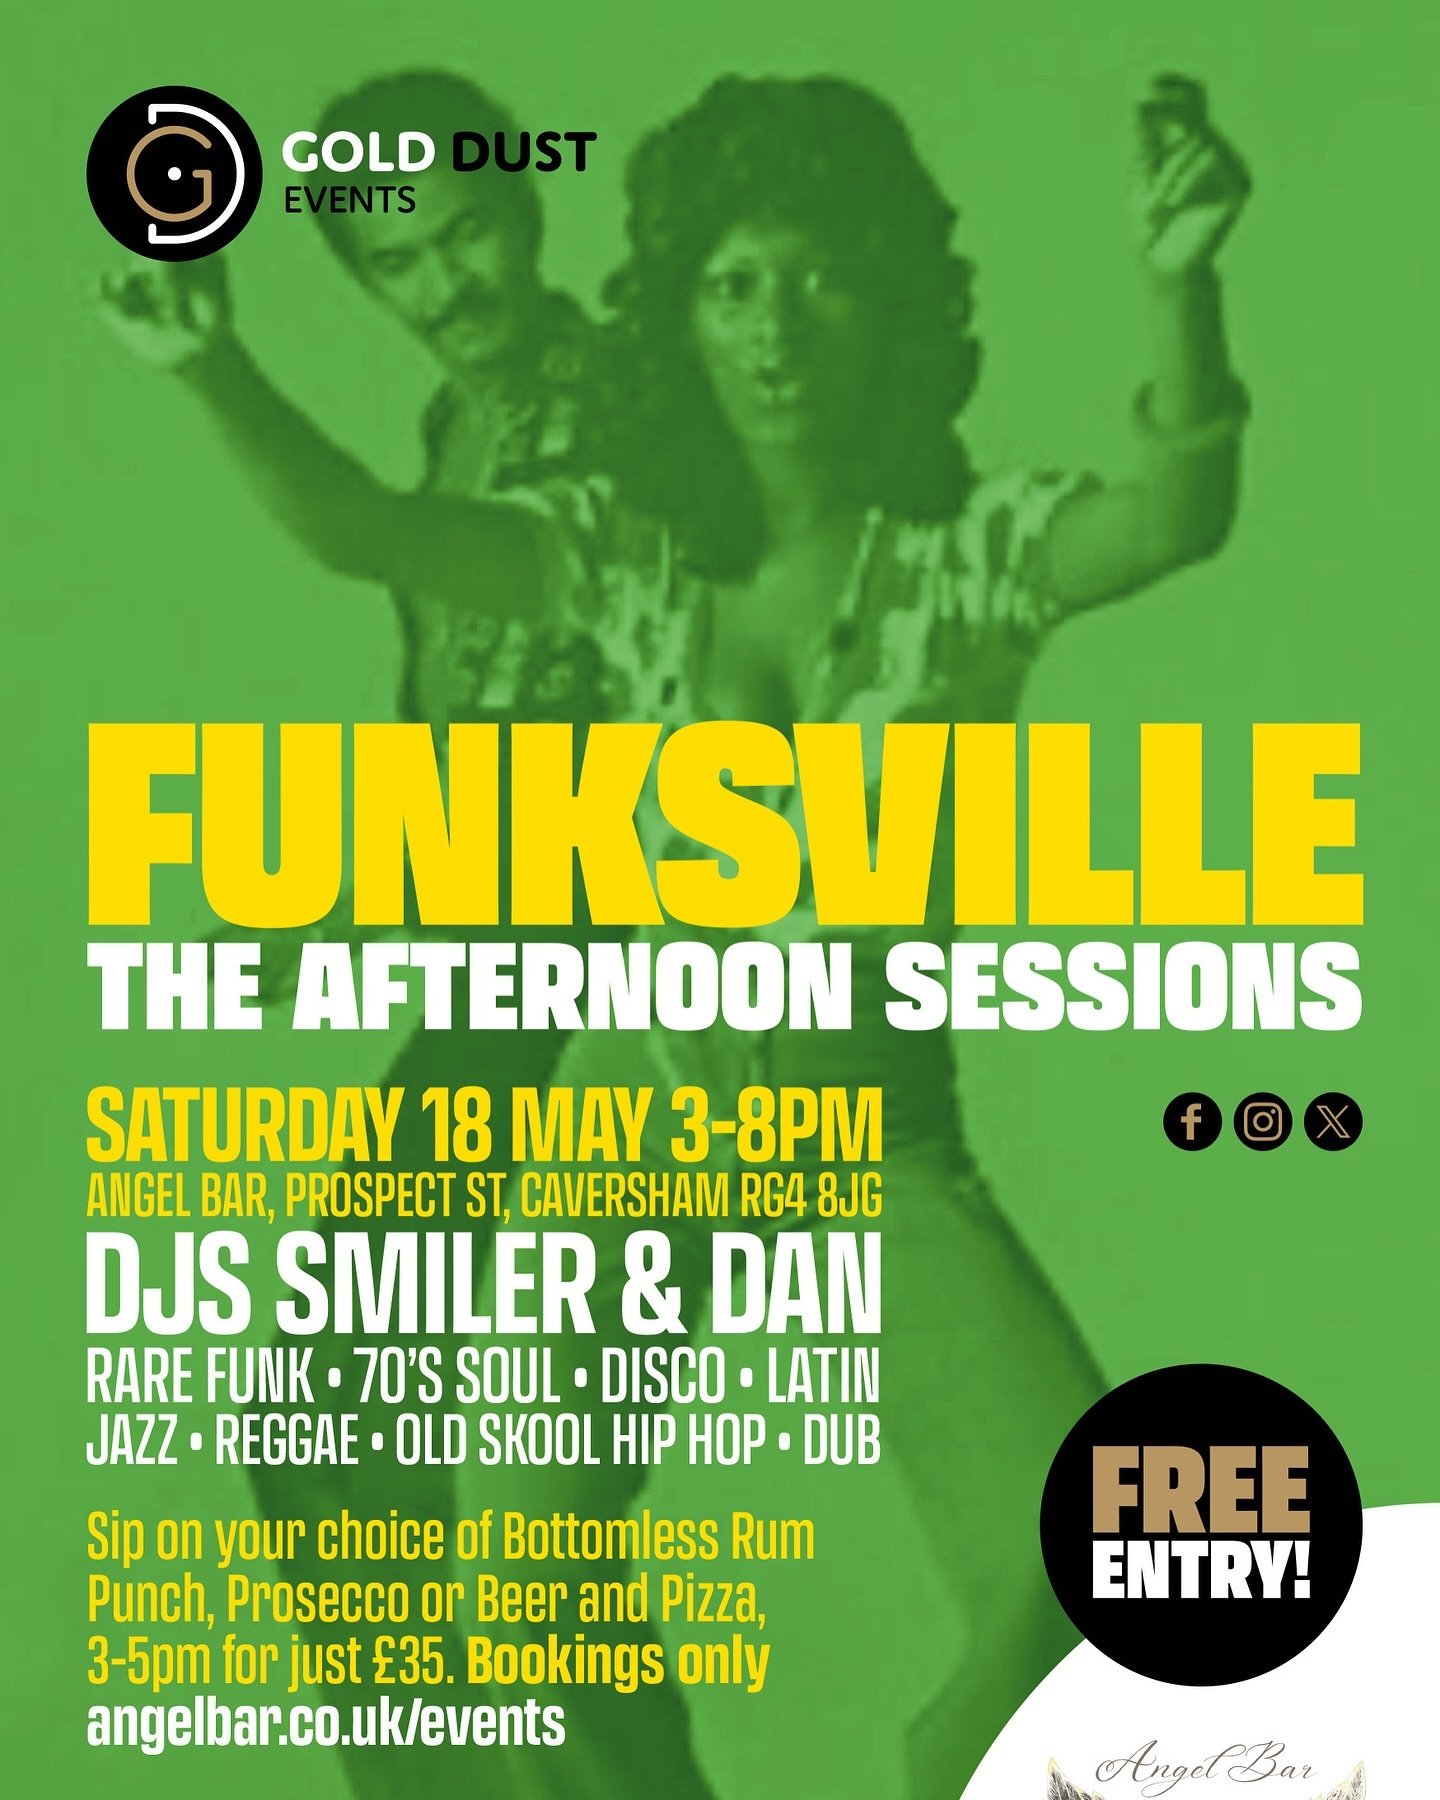 Coming soon!

Gold Dust events presents &ldquo;Funksville&rdquo; the afternoon sessions, Saturday 18 May 2024 at Angel Bar, 18 Prospect Street, Caversham, Reading, RG4 8JG.

Join us for our first Bottomless Brunch session with @modsmiler2022 DJs Paul